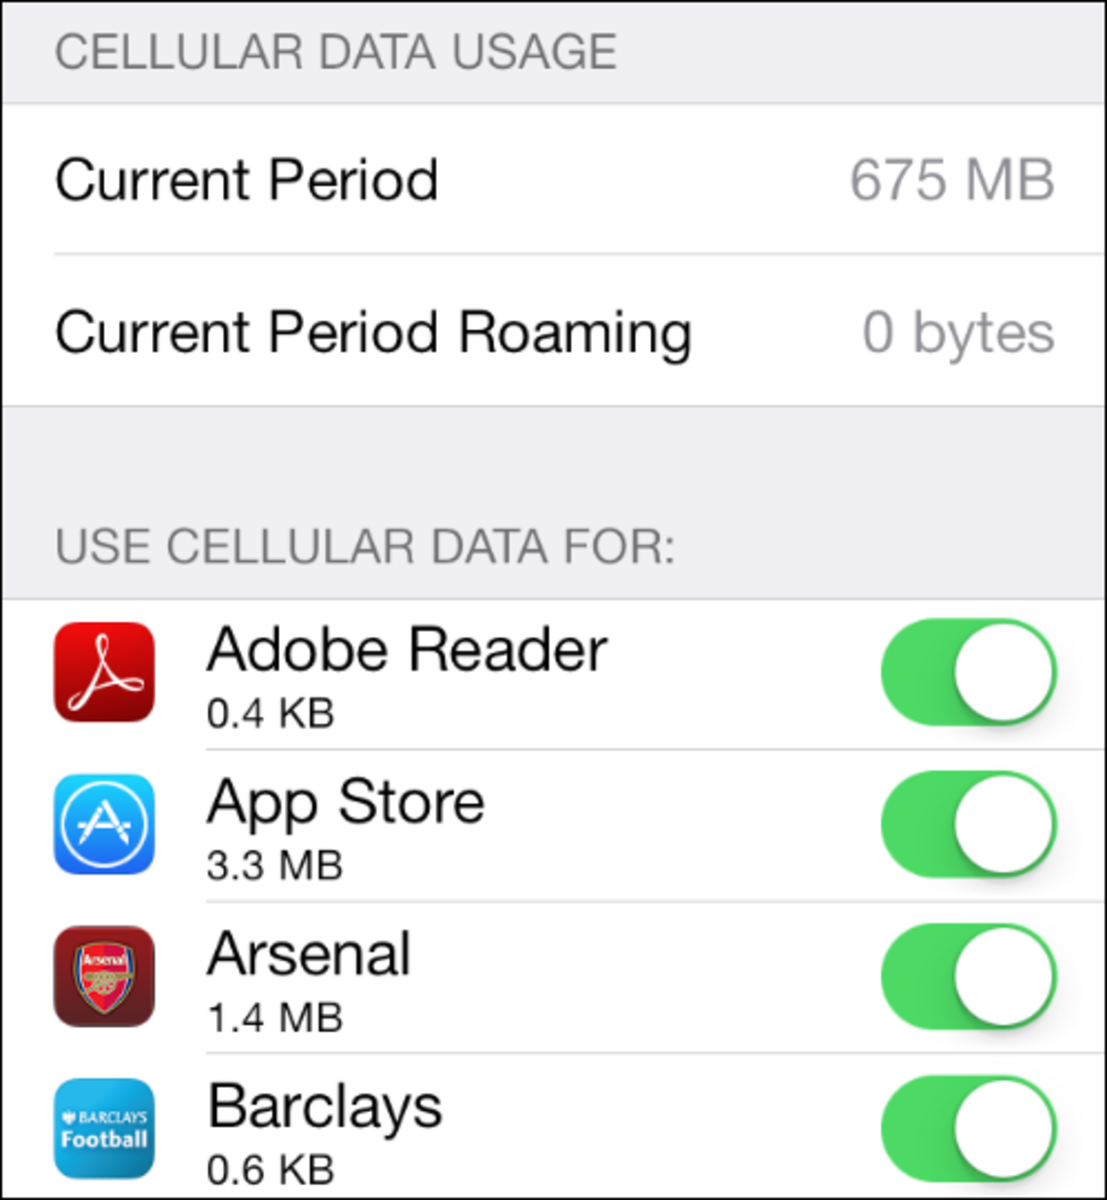 Cellular  data usage feature in IOS 7